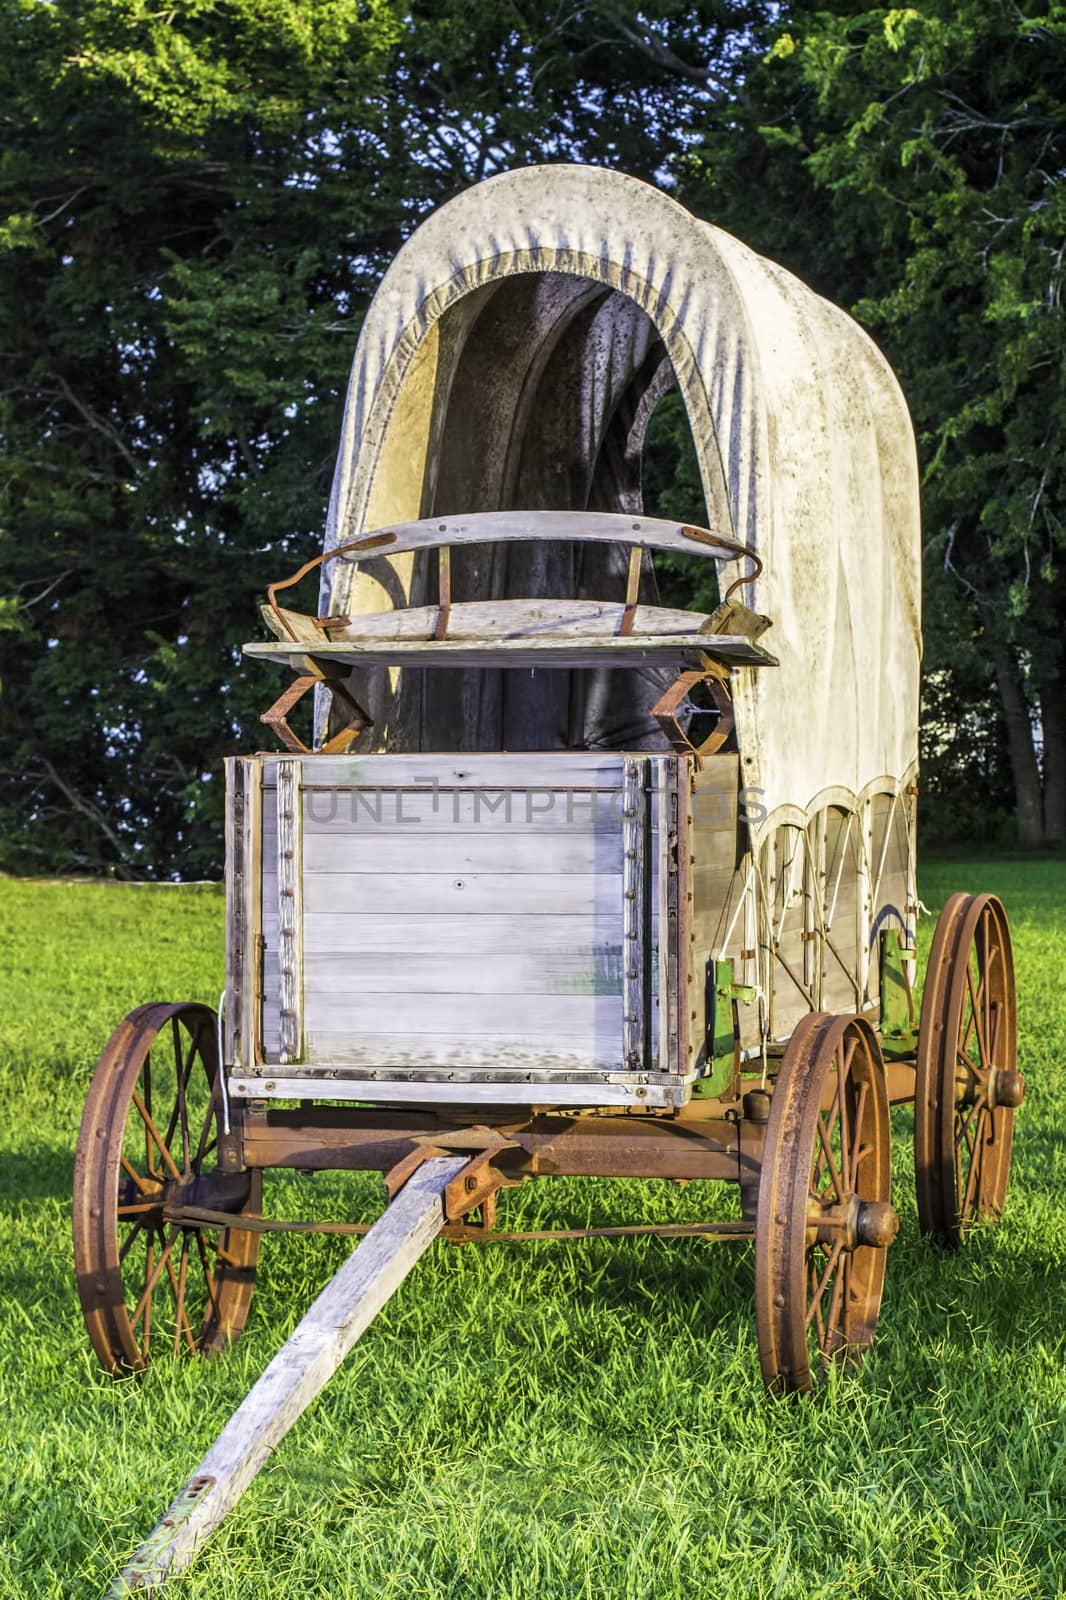 A front view of a stagecoach that was from the 1800s.